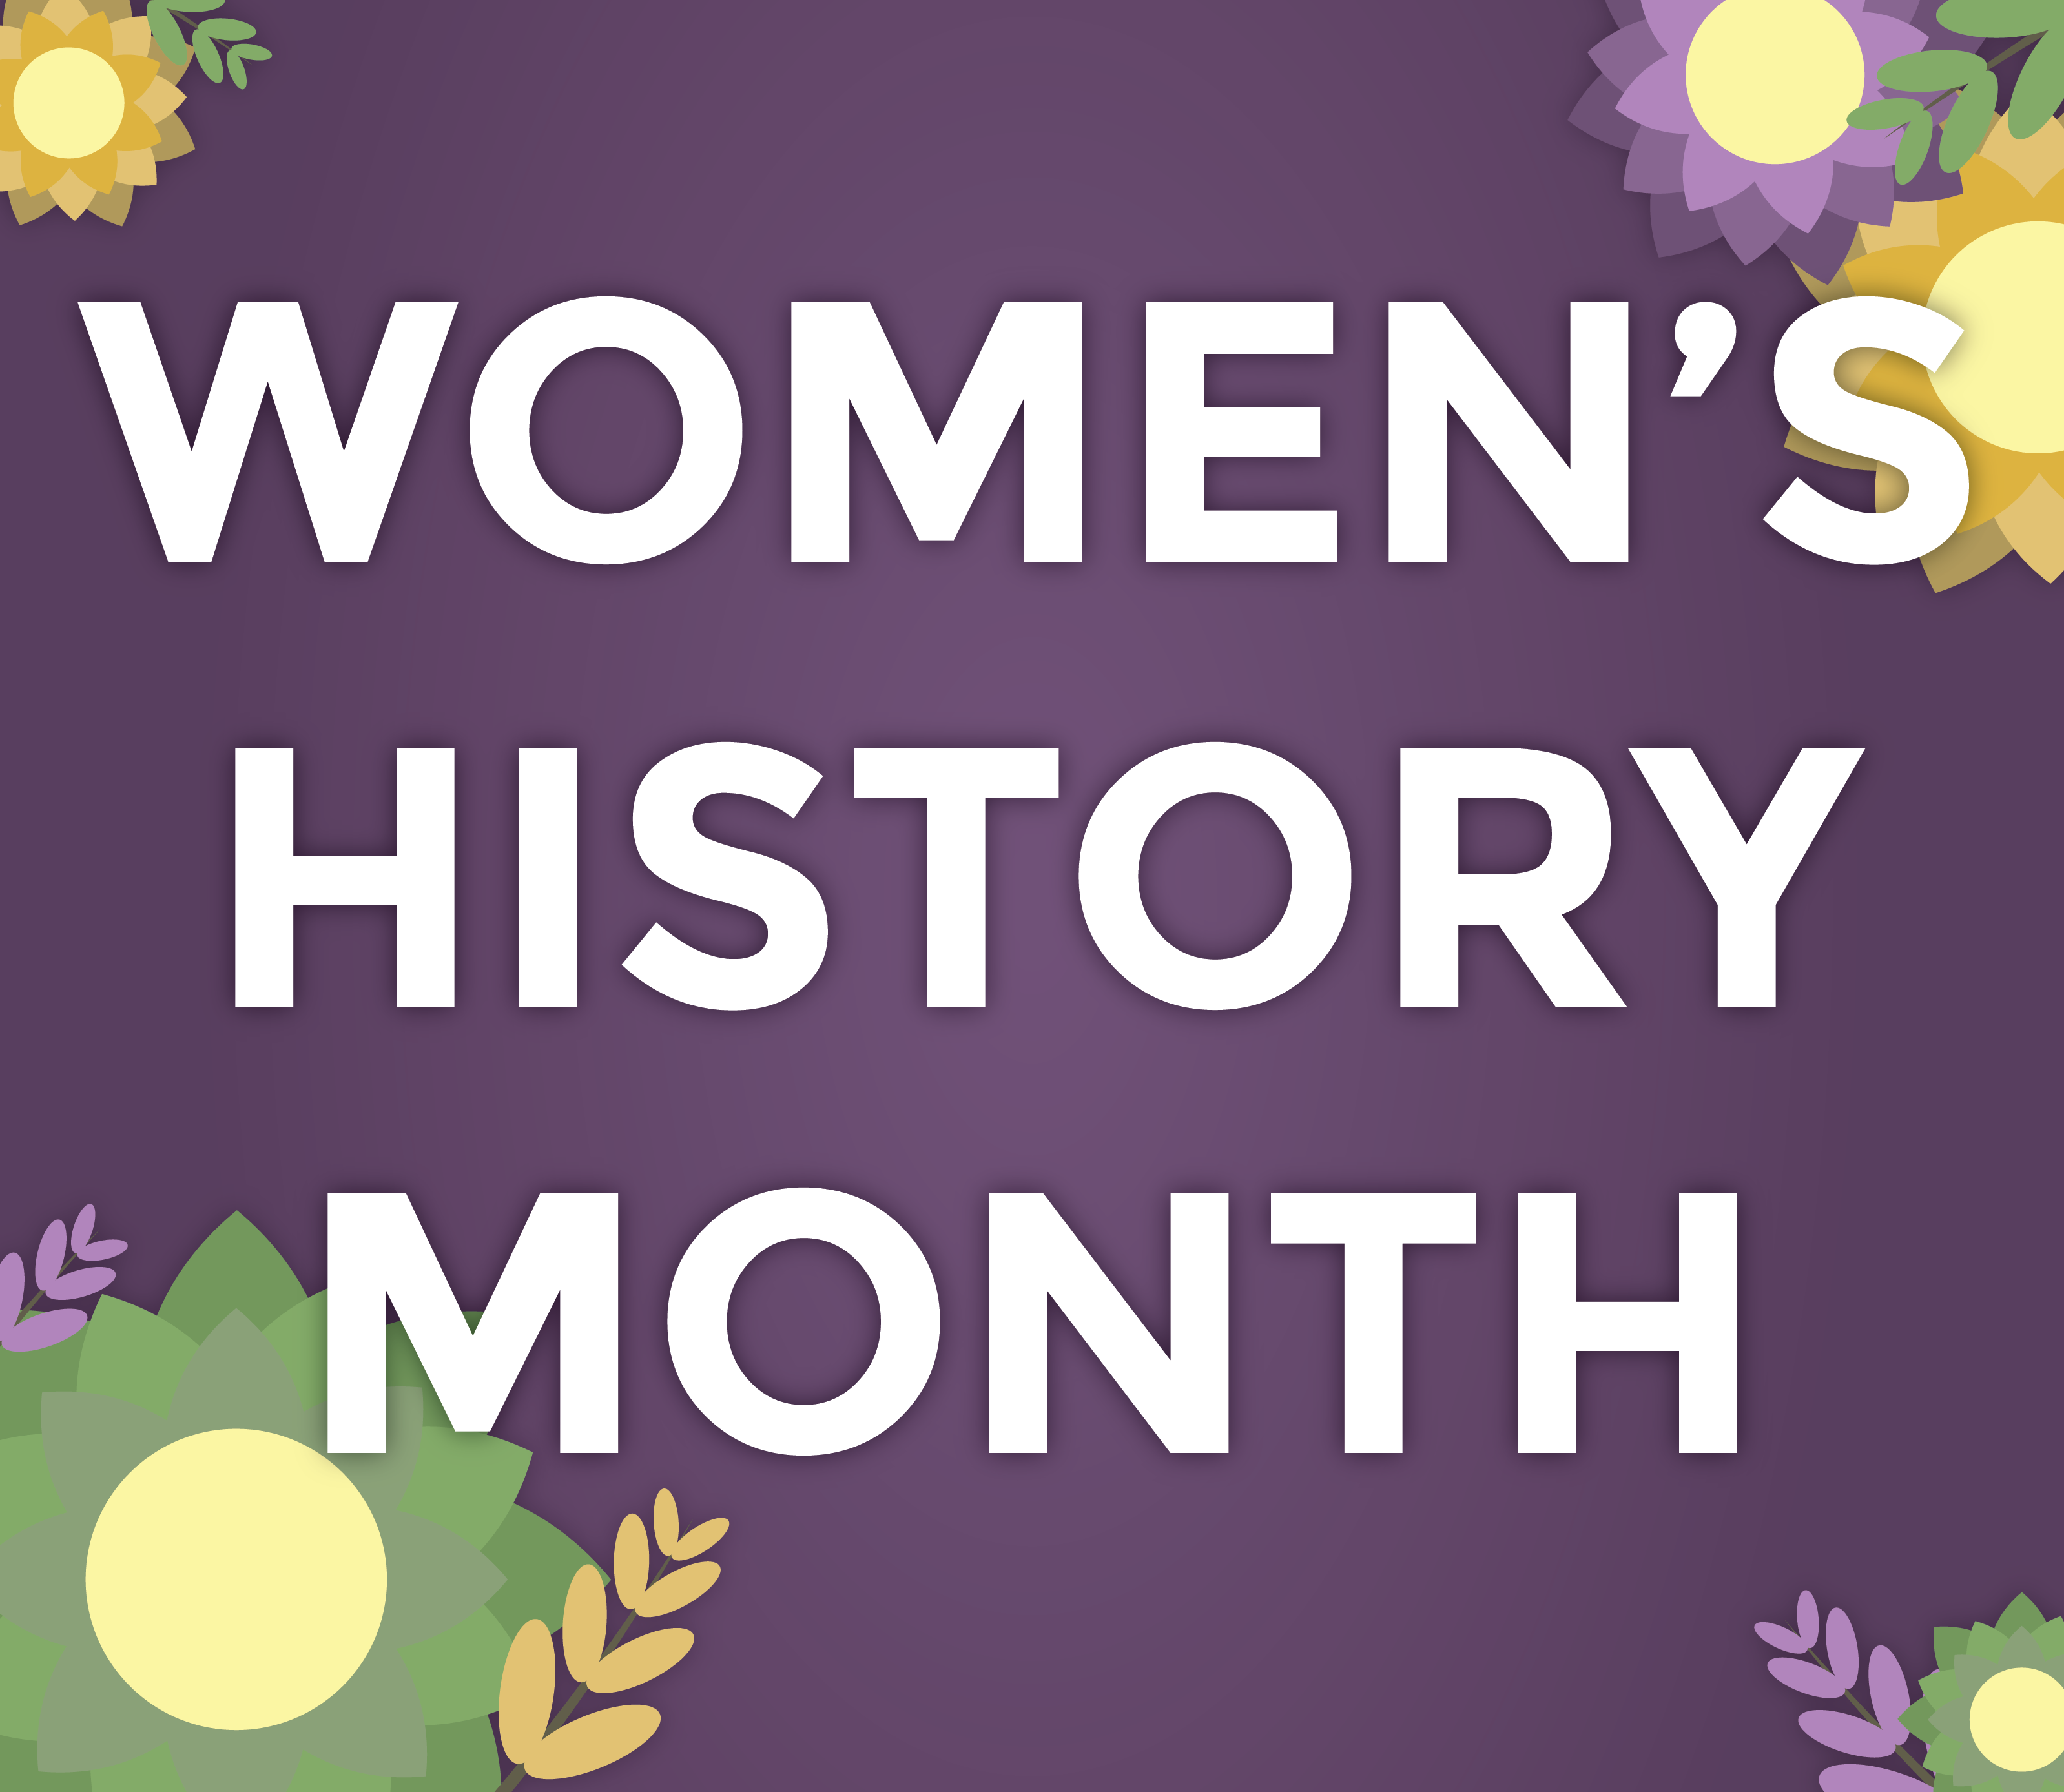 Women's History Month on 88.9